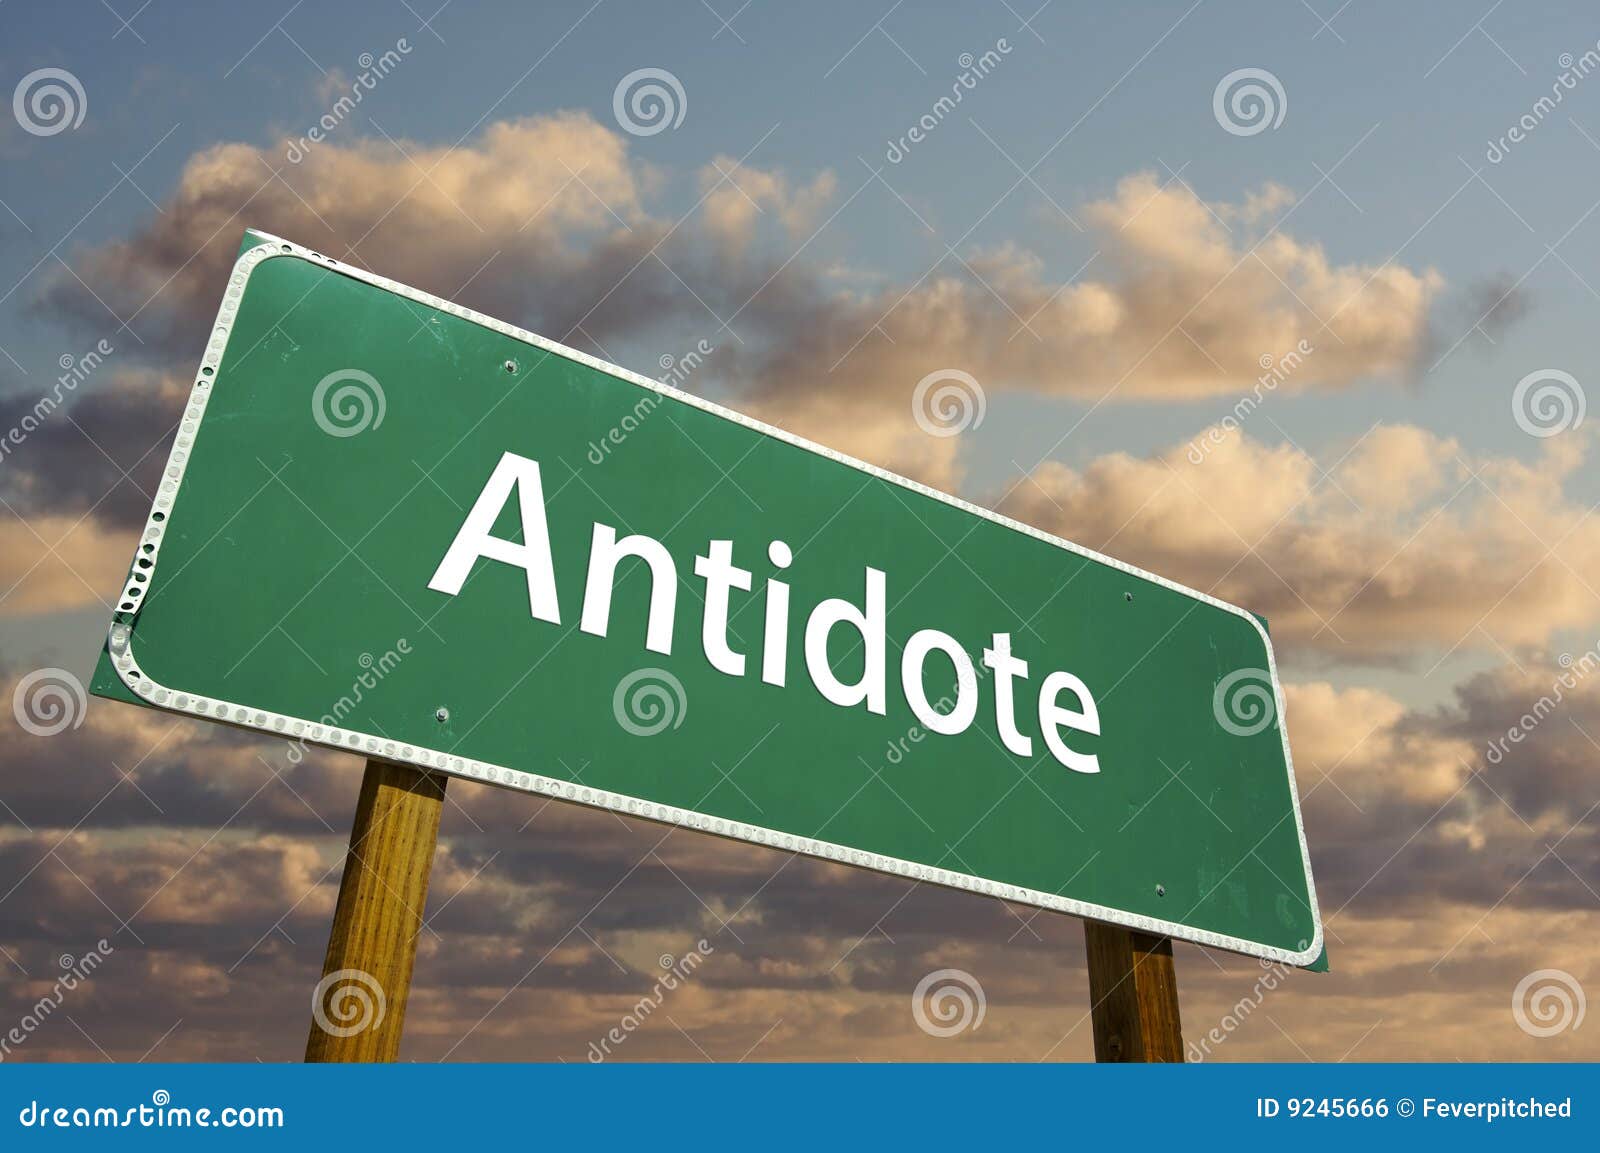 antidote green road sign